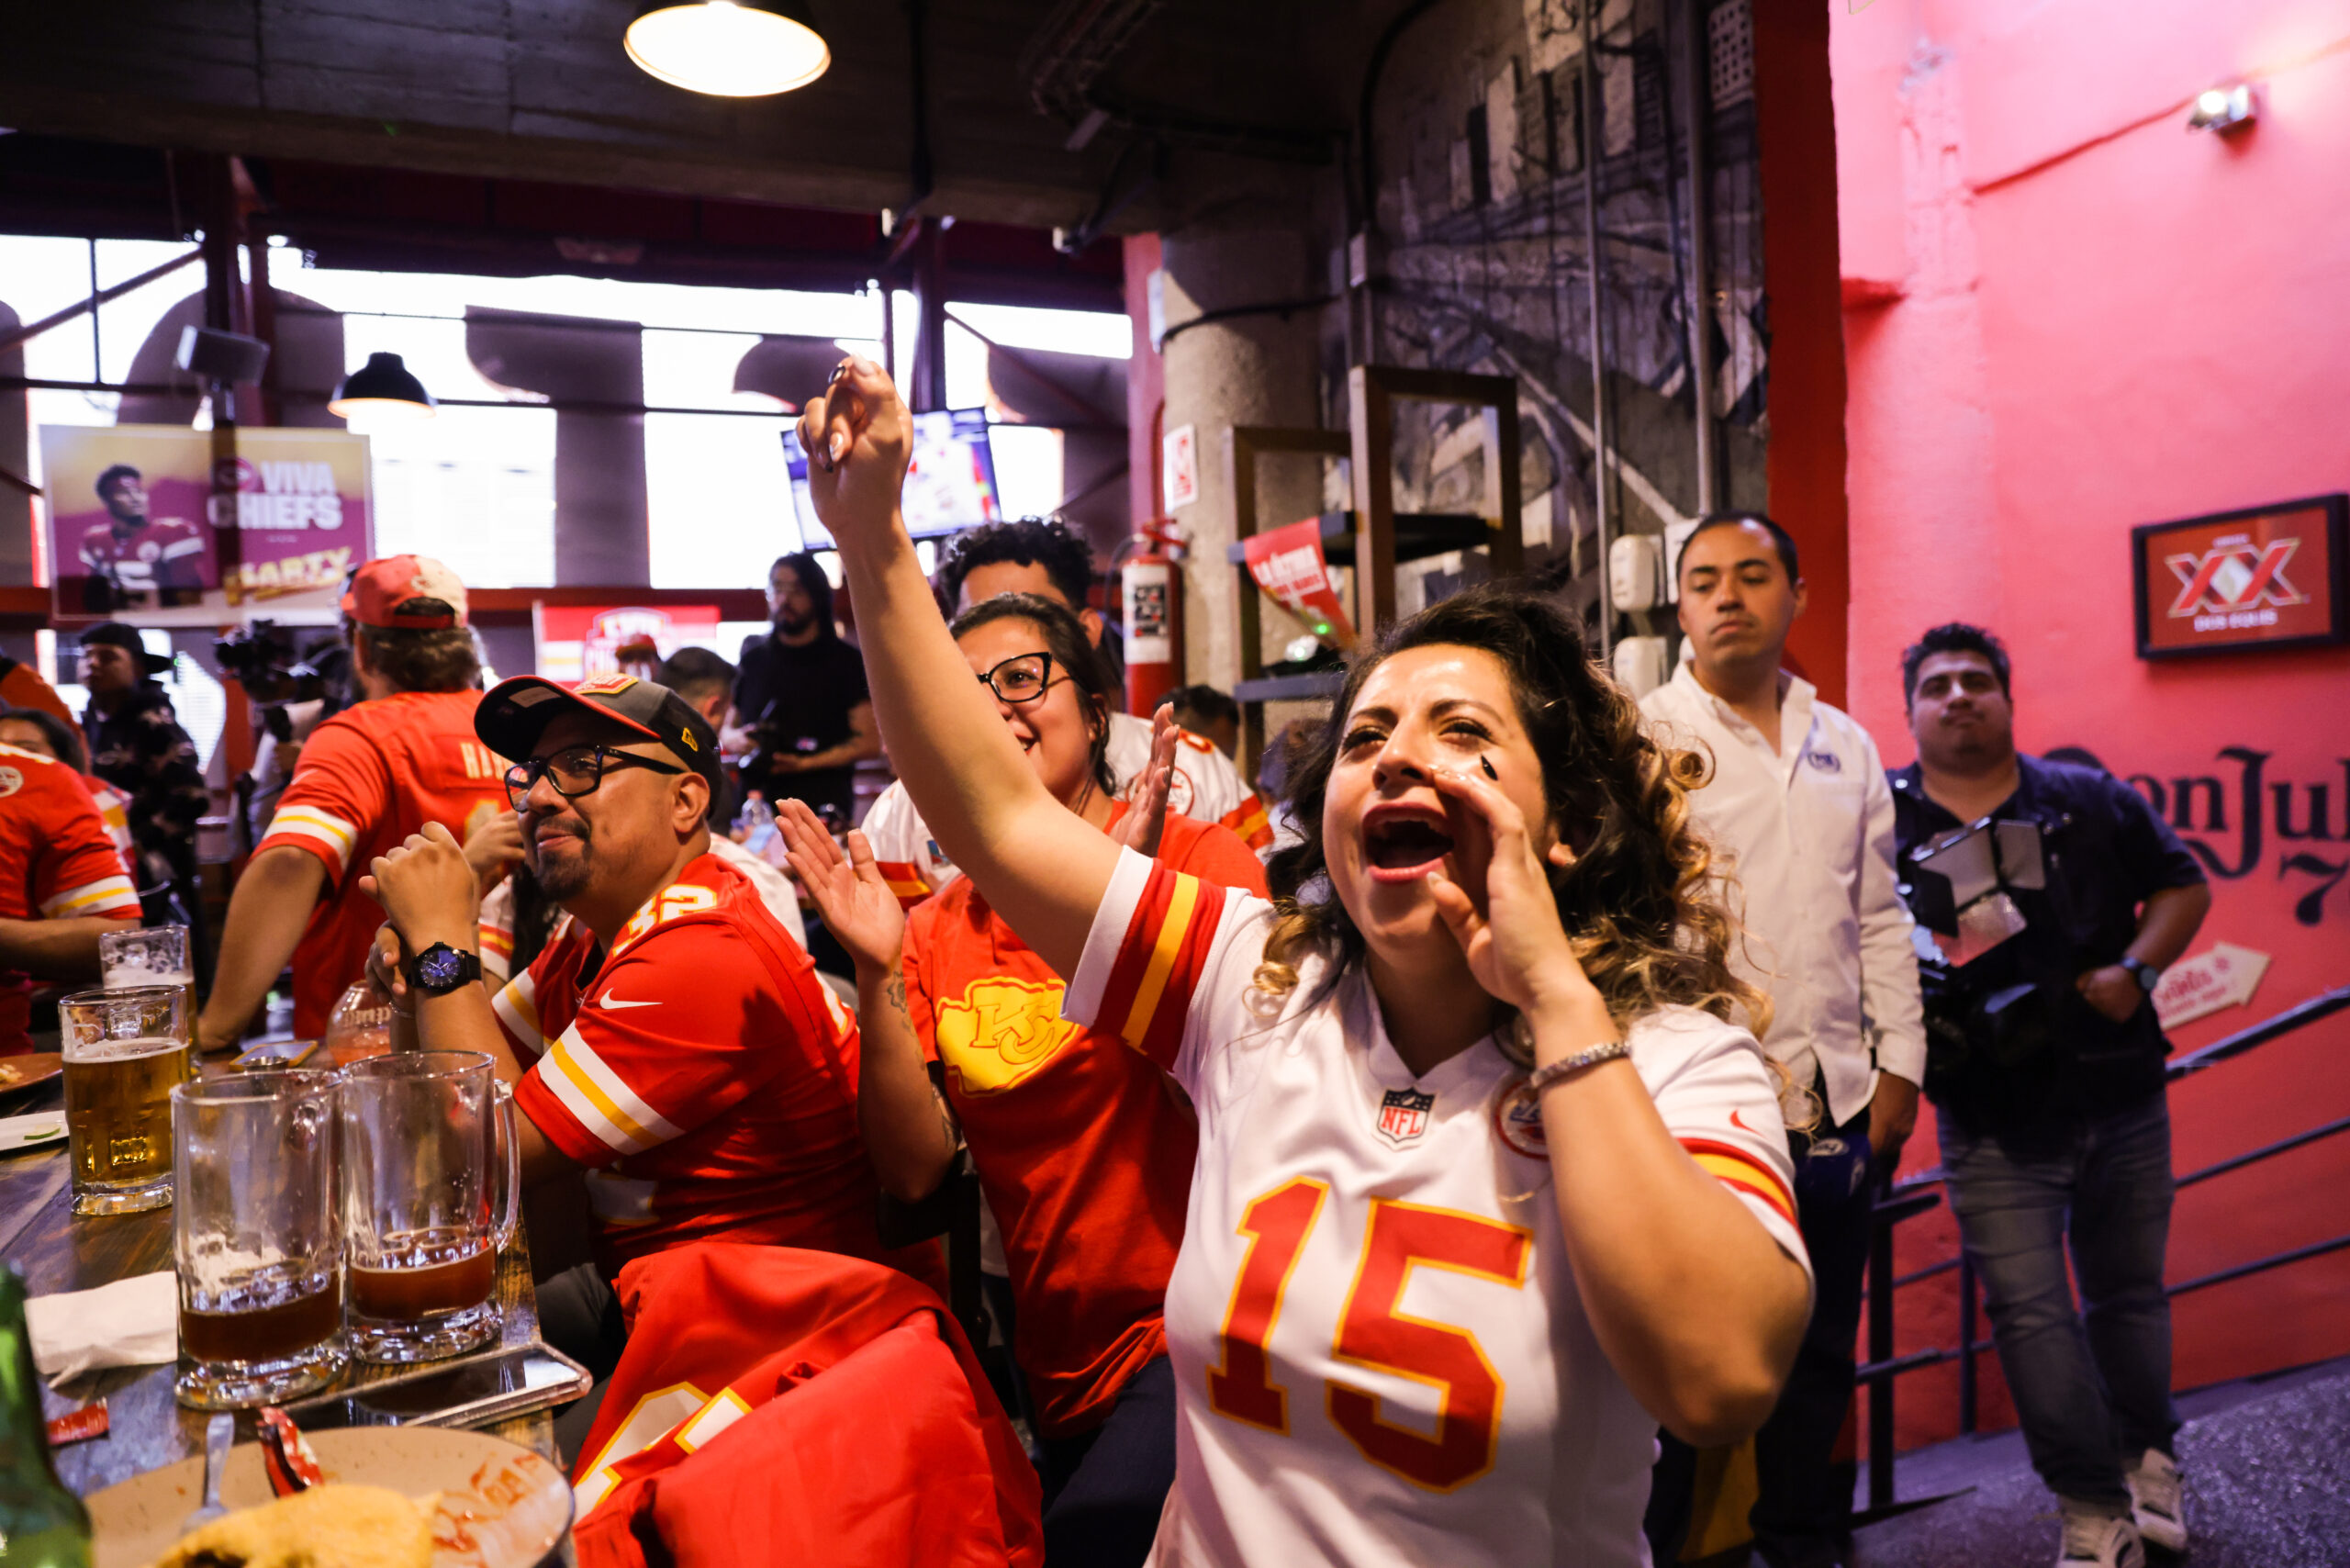 Kansas City Chiefs Triple Watch Party in Mexico